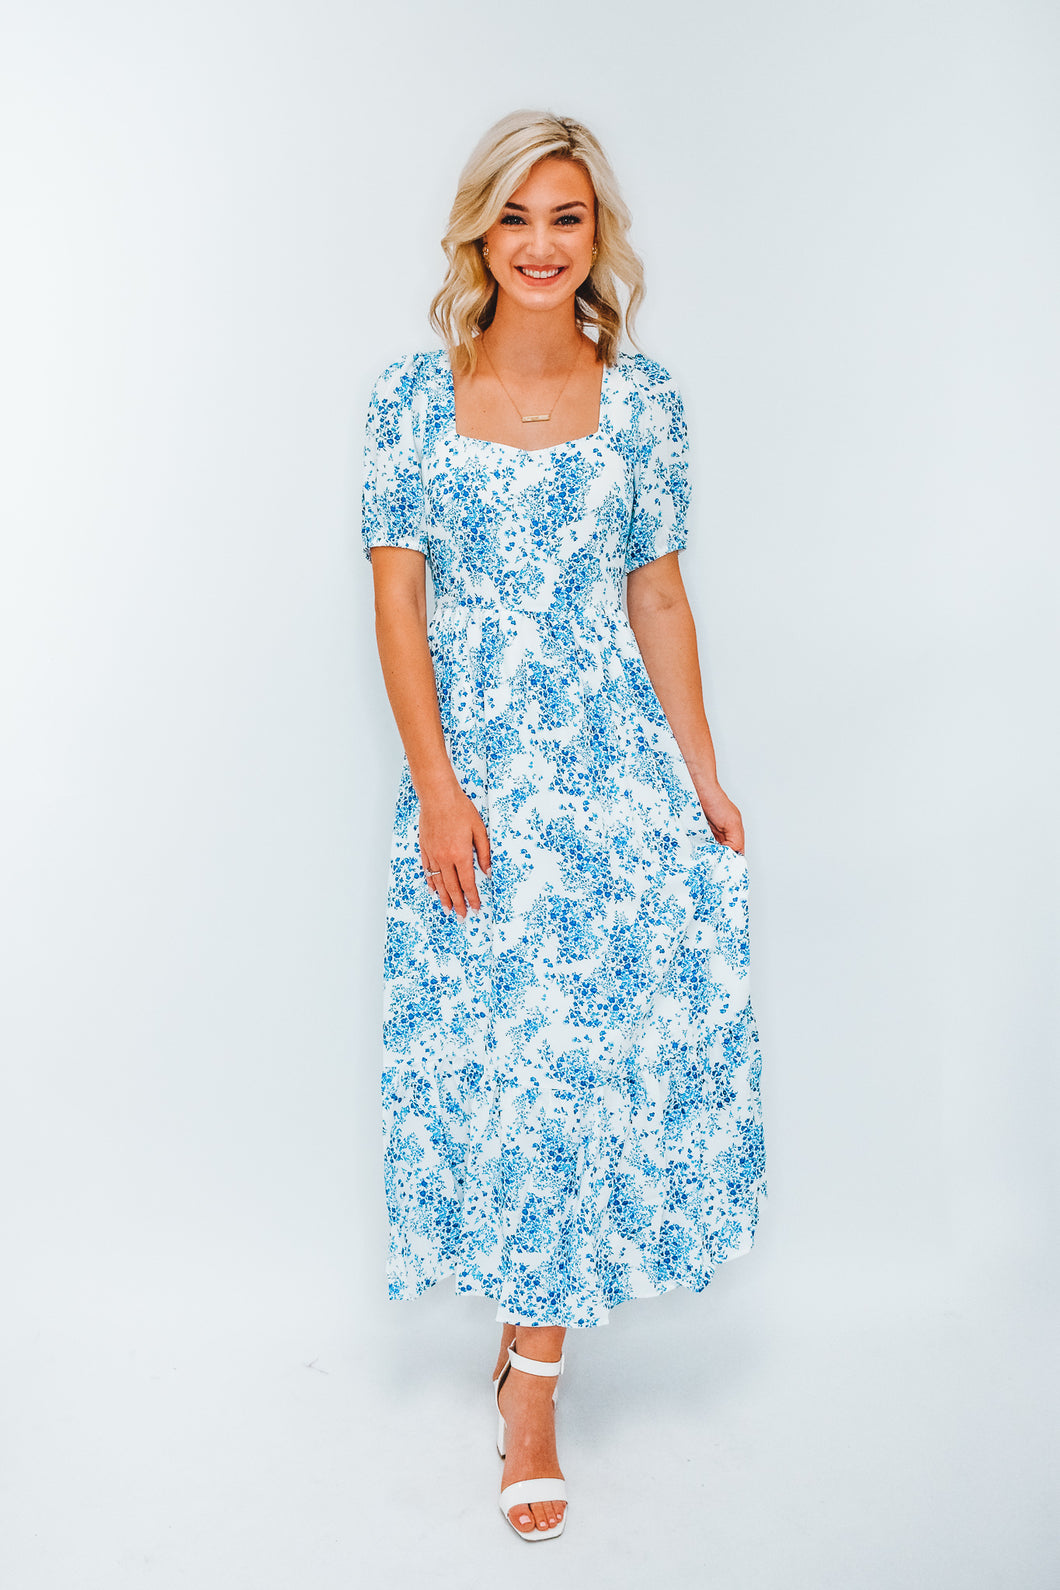 That Thing You Blue Floral Maxi Dress